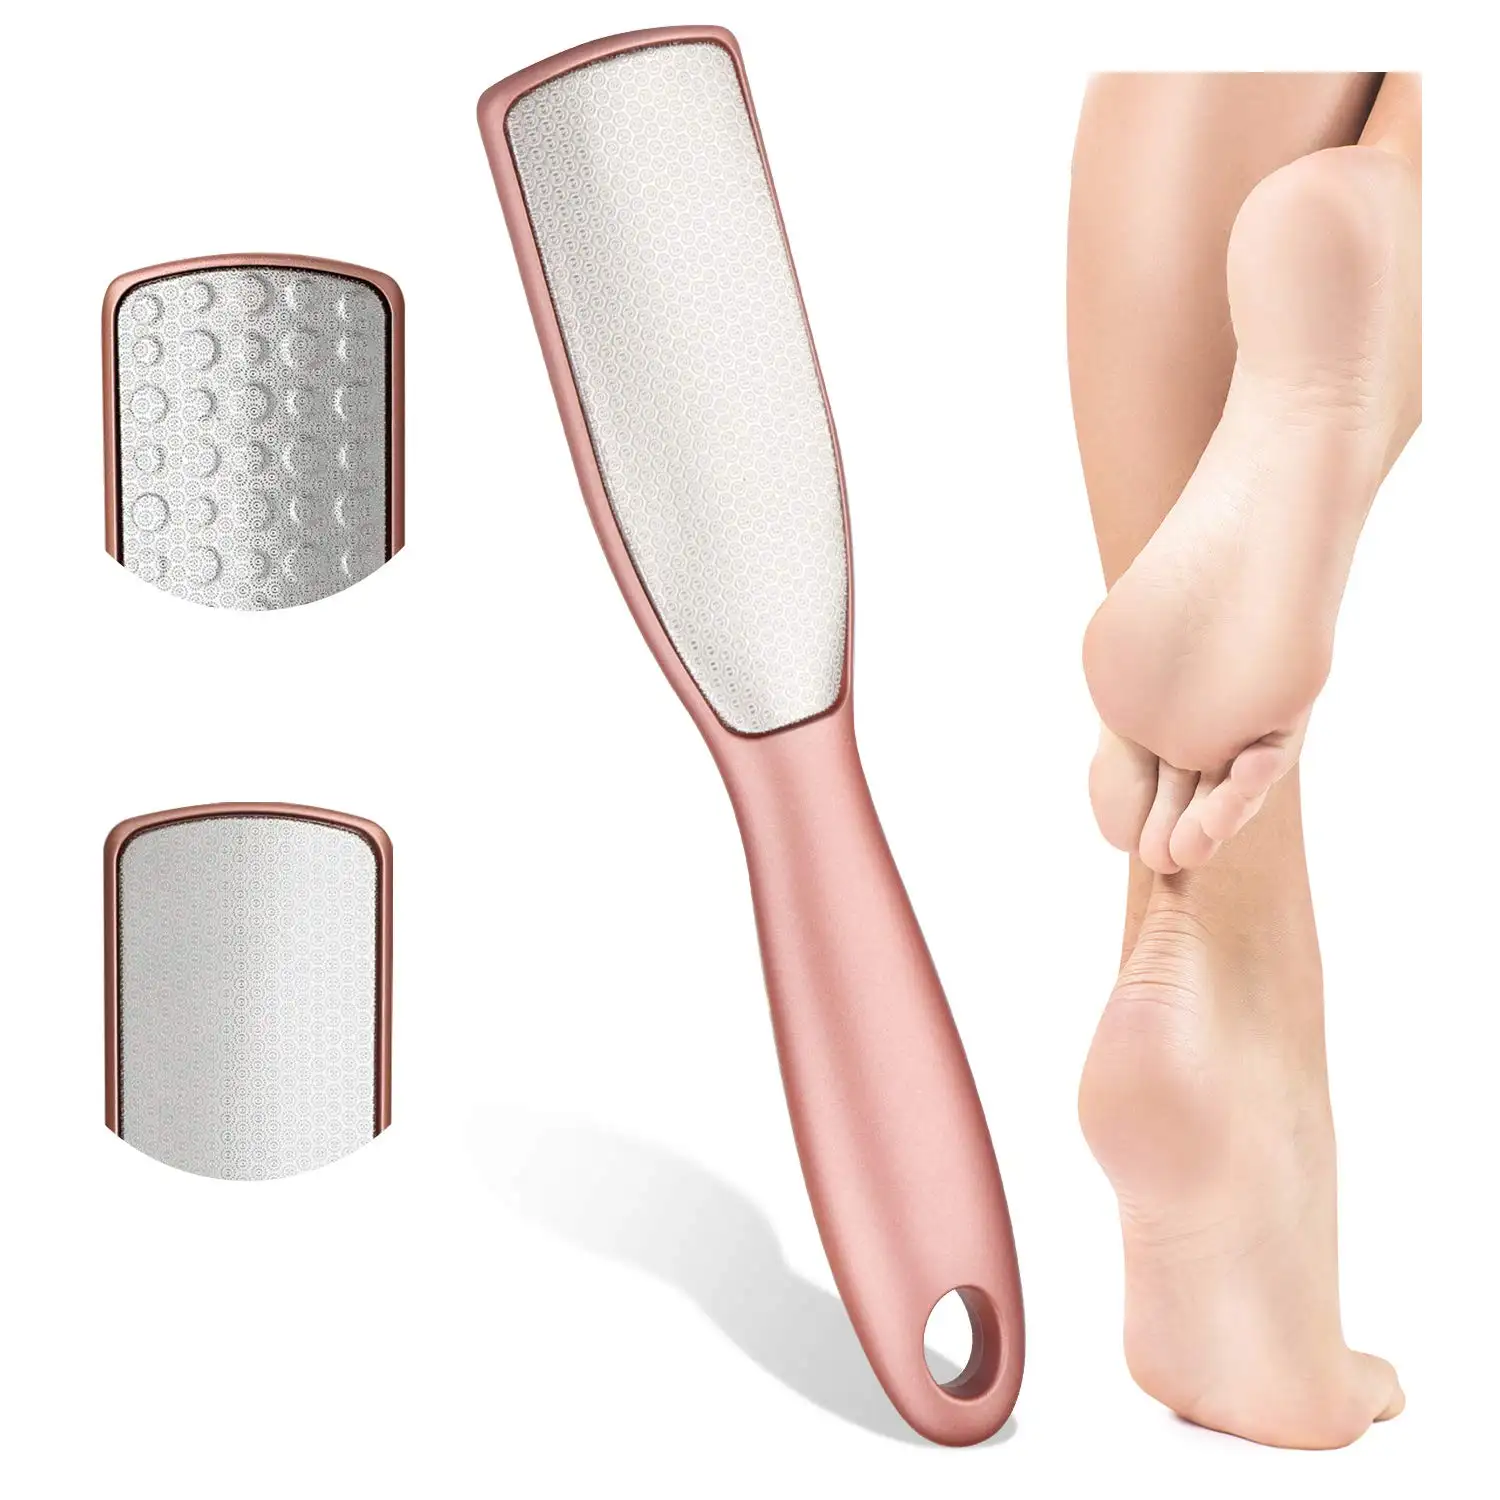 1Pcs Double Sided Pedicure Tool Professional Foot File Callus Remover Rasp Scrubber For Dead Skin Heel Used on Wet and Dry Feet